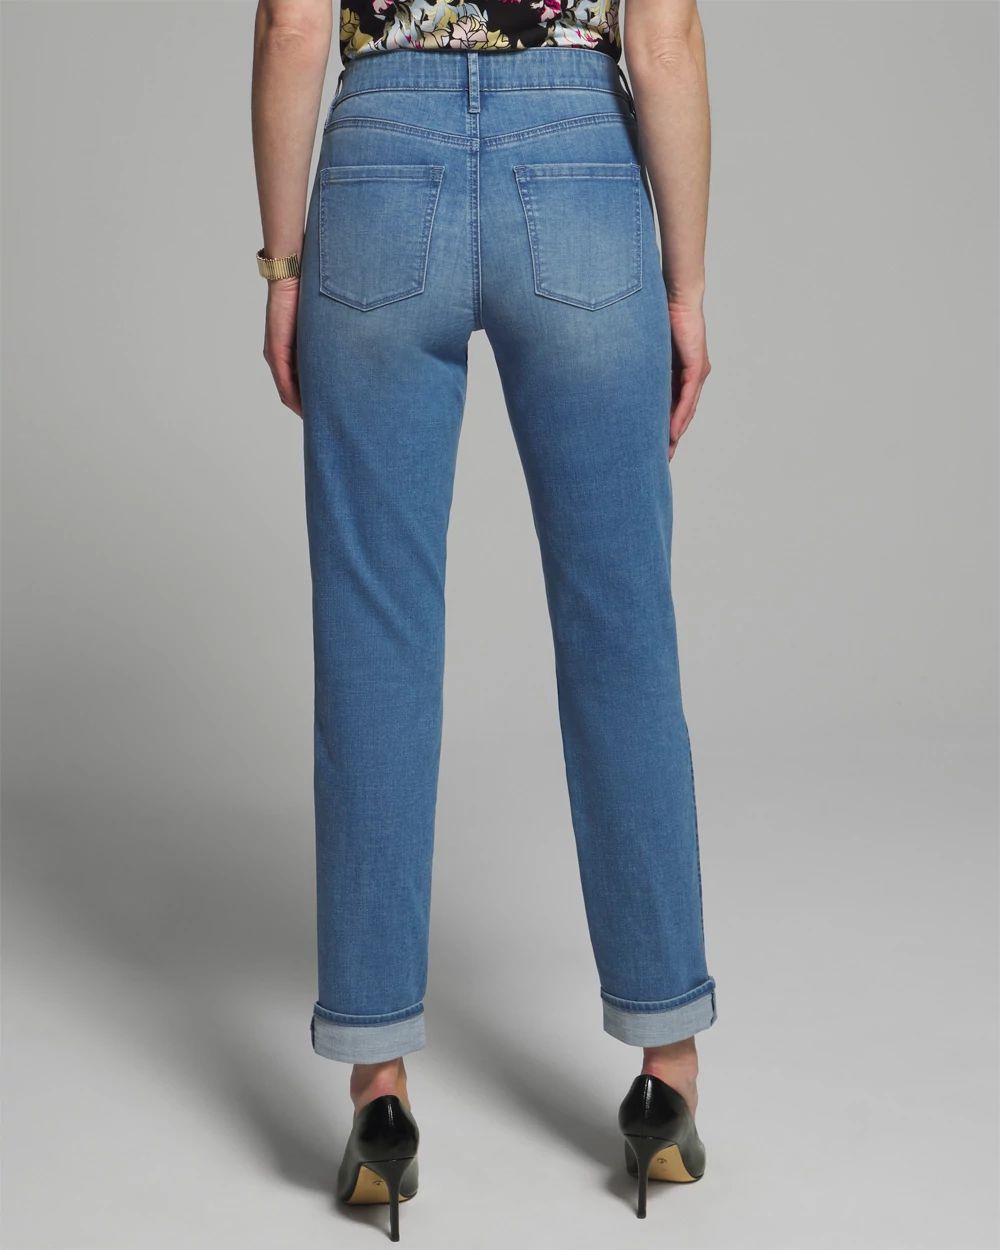 Outlet WHBM Mid-Rise Girlfriend Jean click to view larger image.